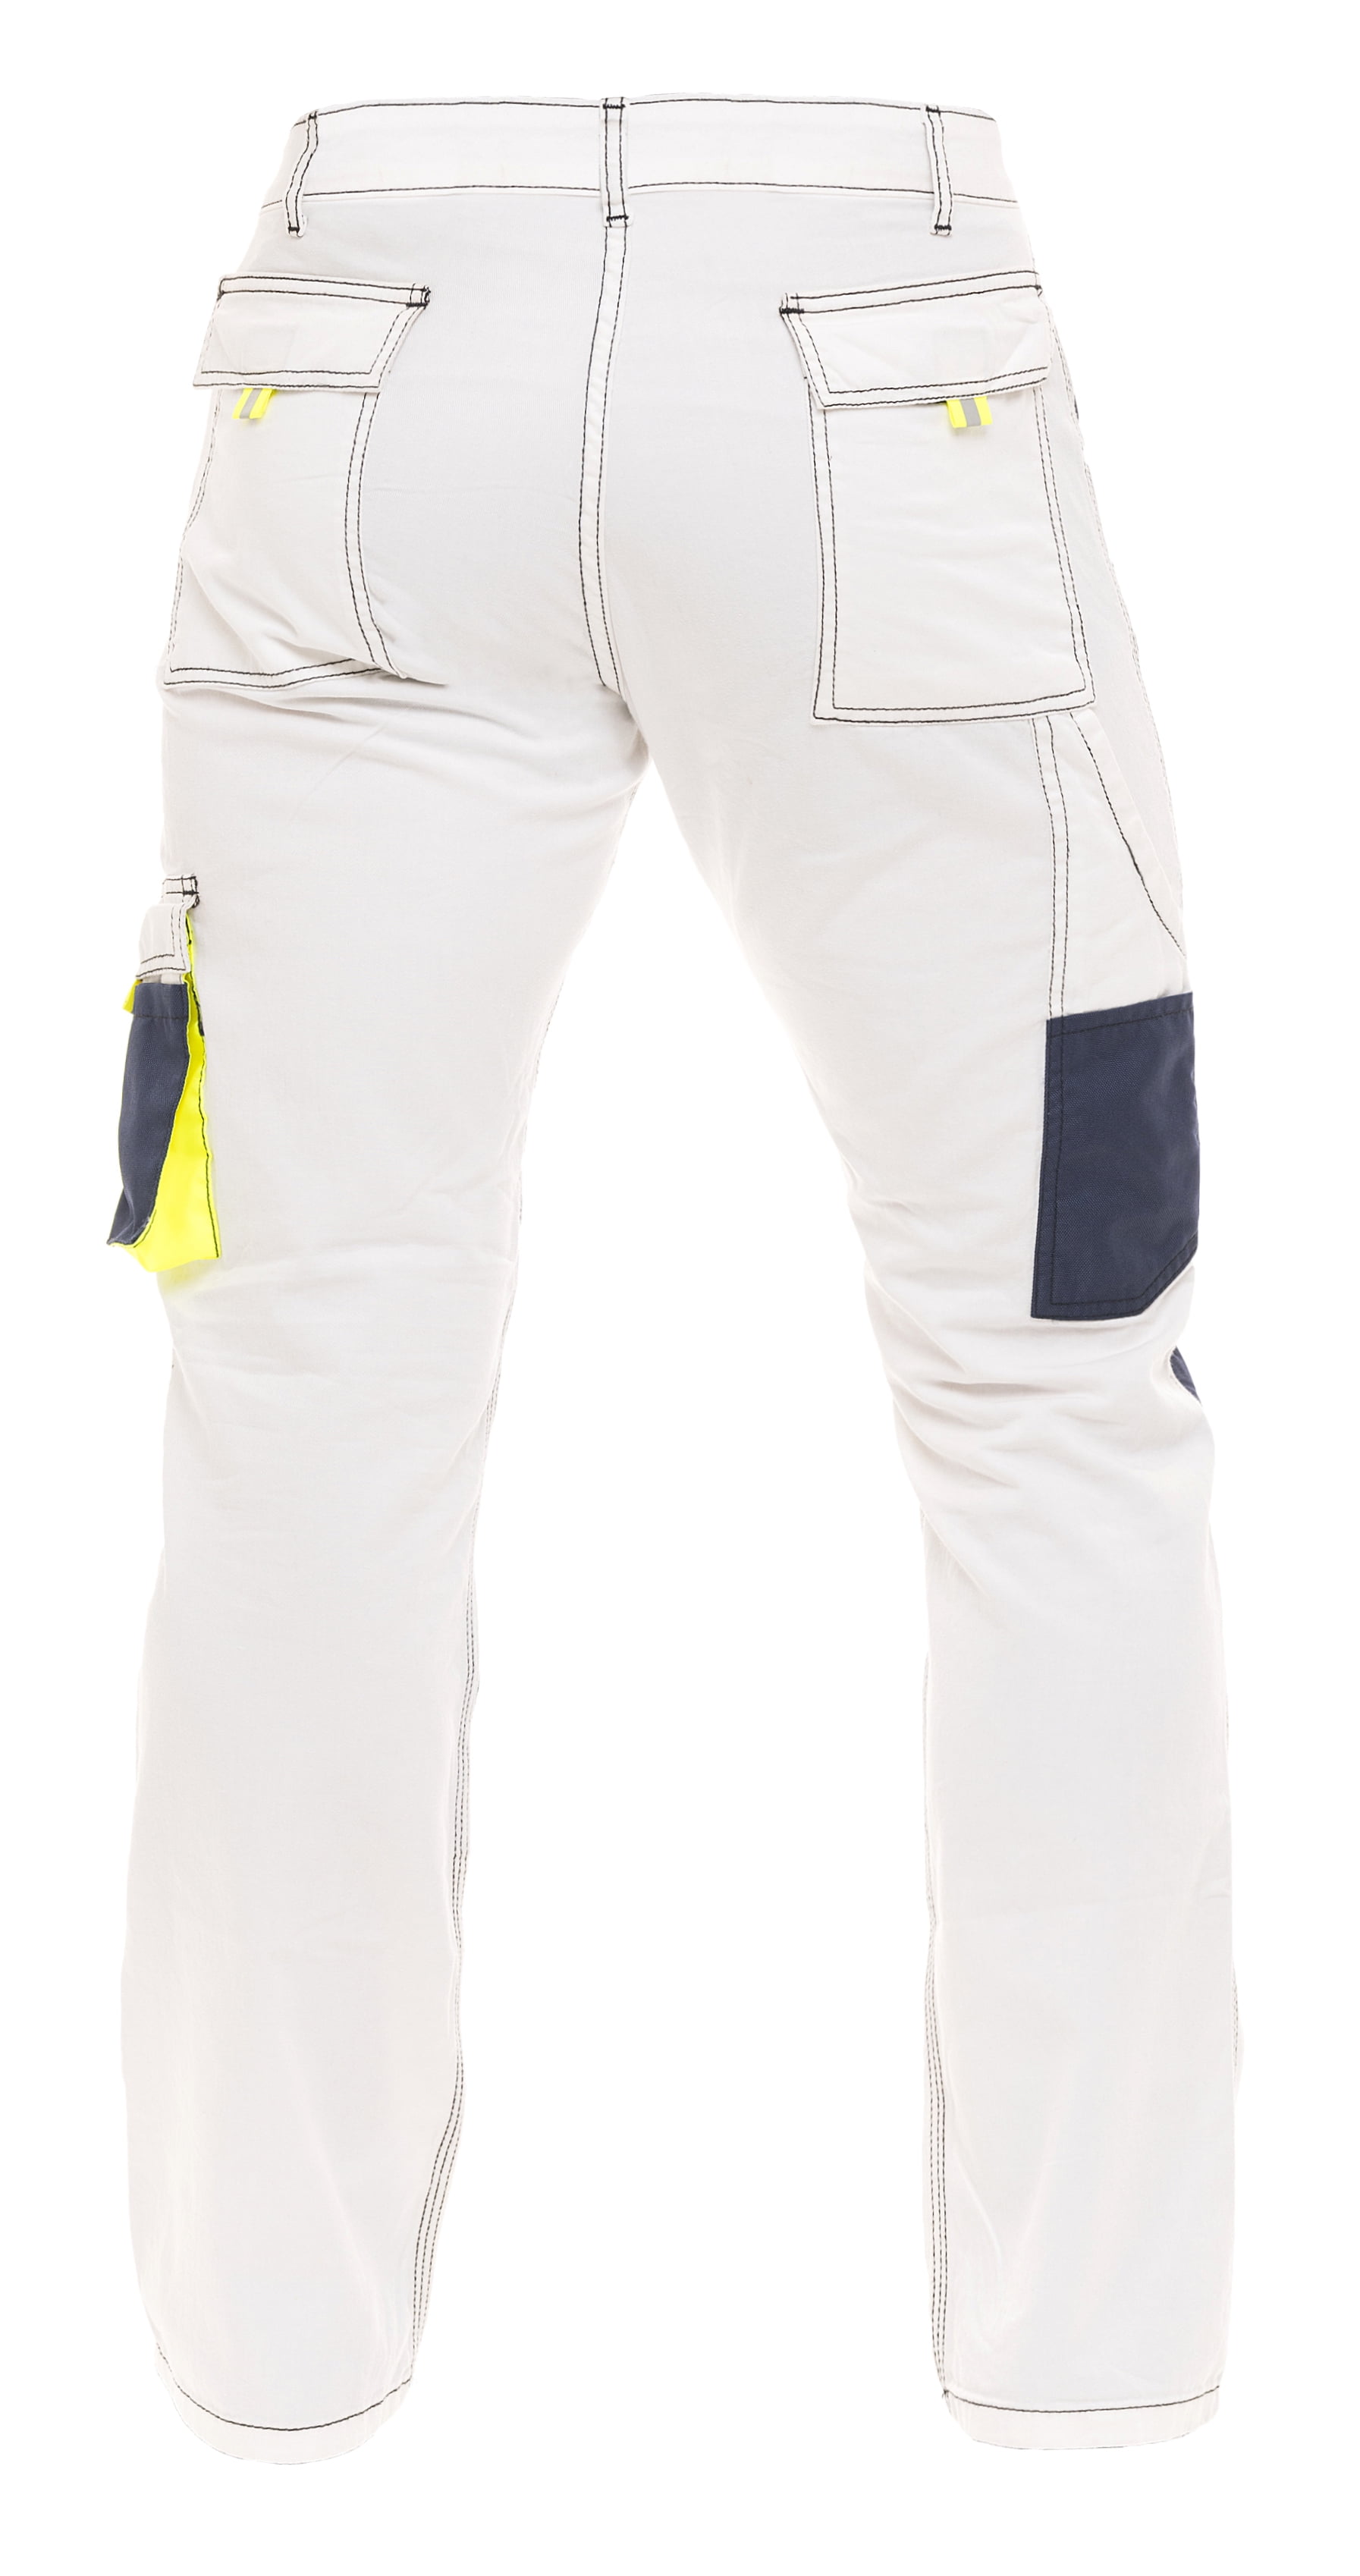 Stay cool in these work trousers made in lightweight CoolTwill fabric  Features an advanced cut with Twisted Leg design Cordura reinforcements  for